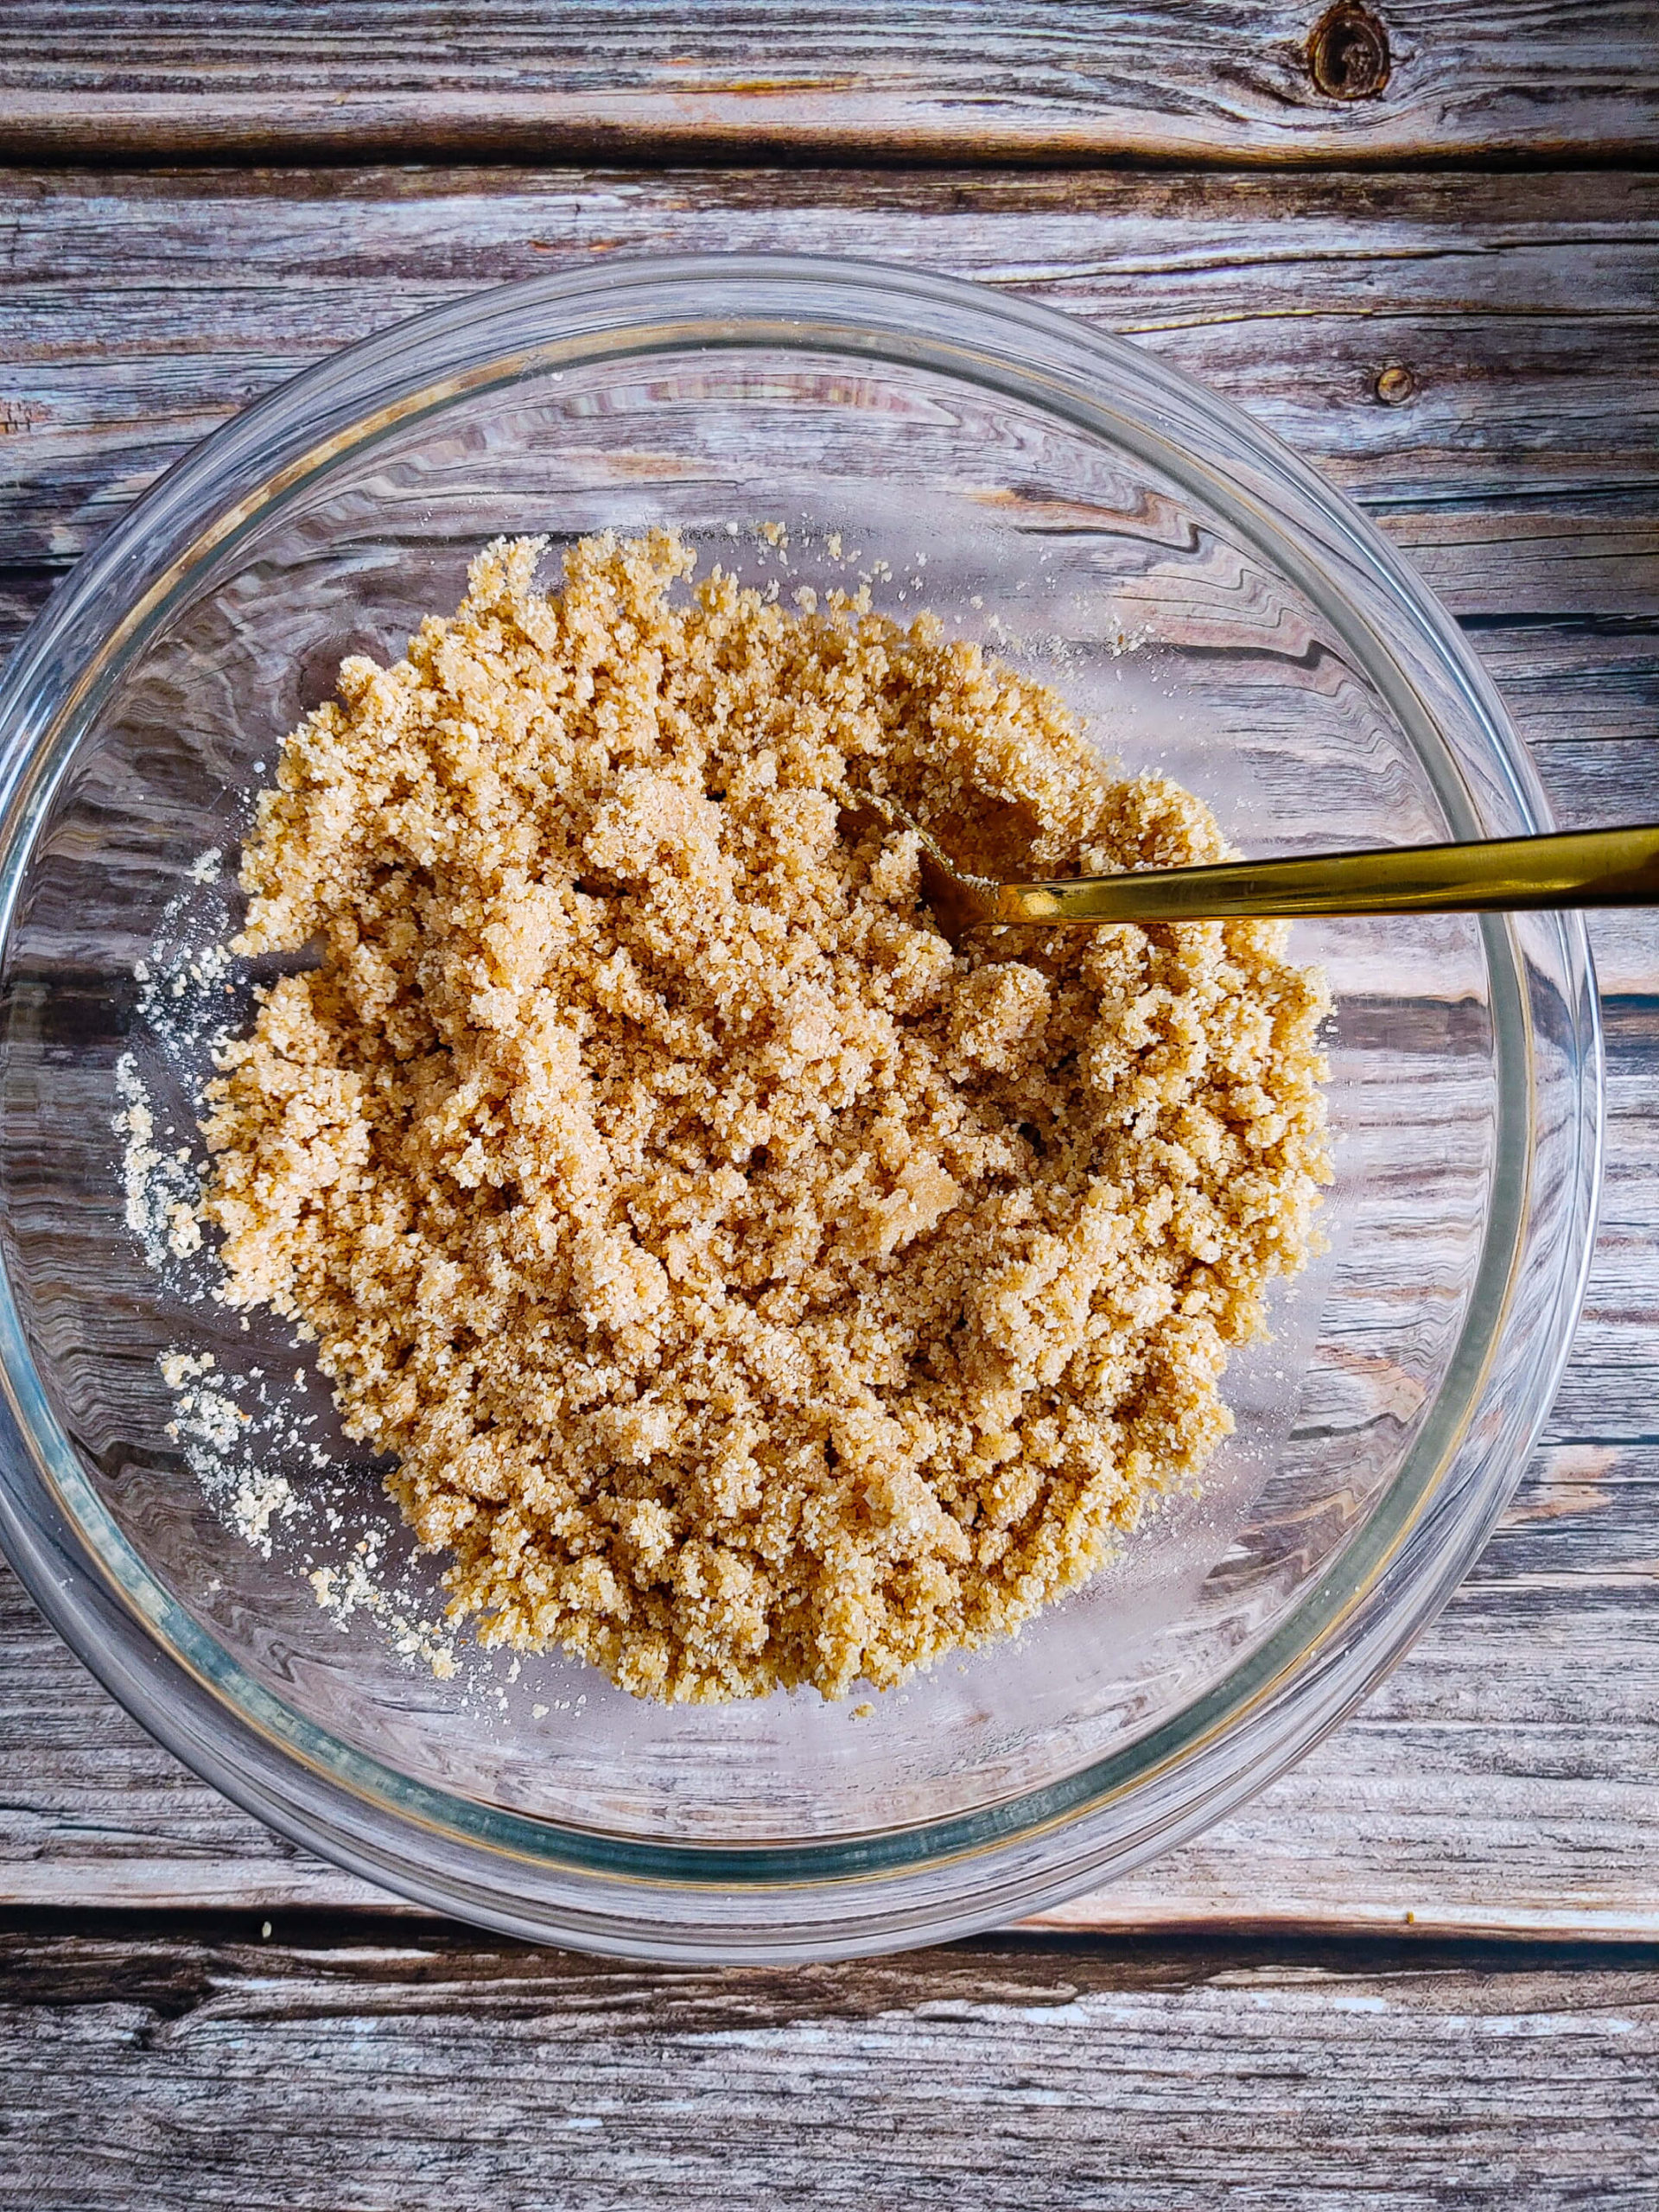 COMBINE THE GRAHAM CRACKER, SUGAR, AND BUTTER TOGETHER